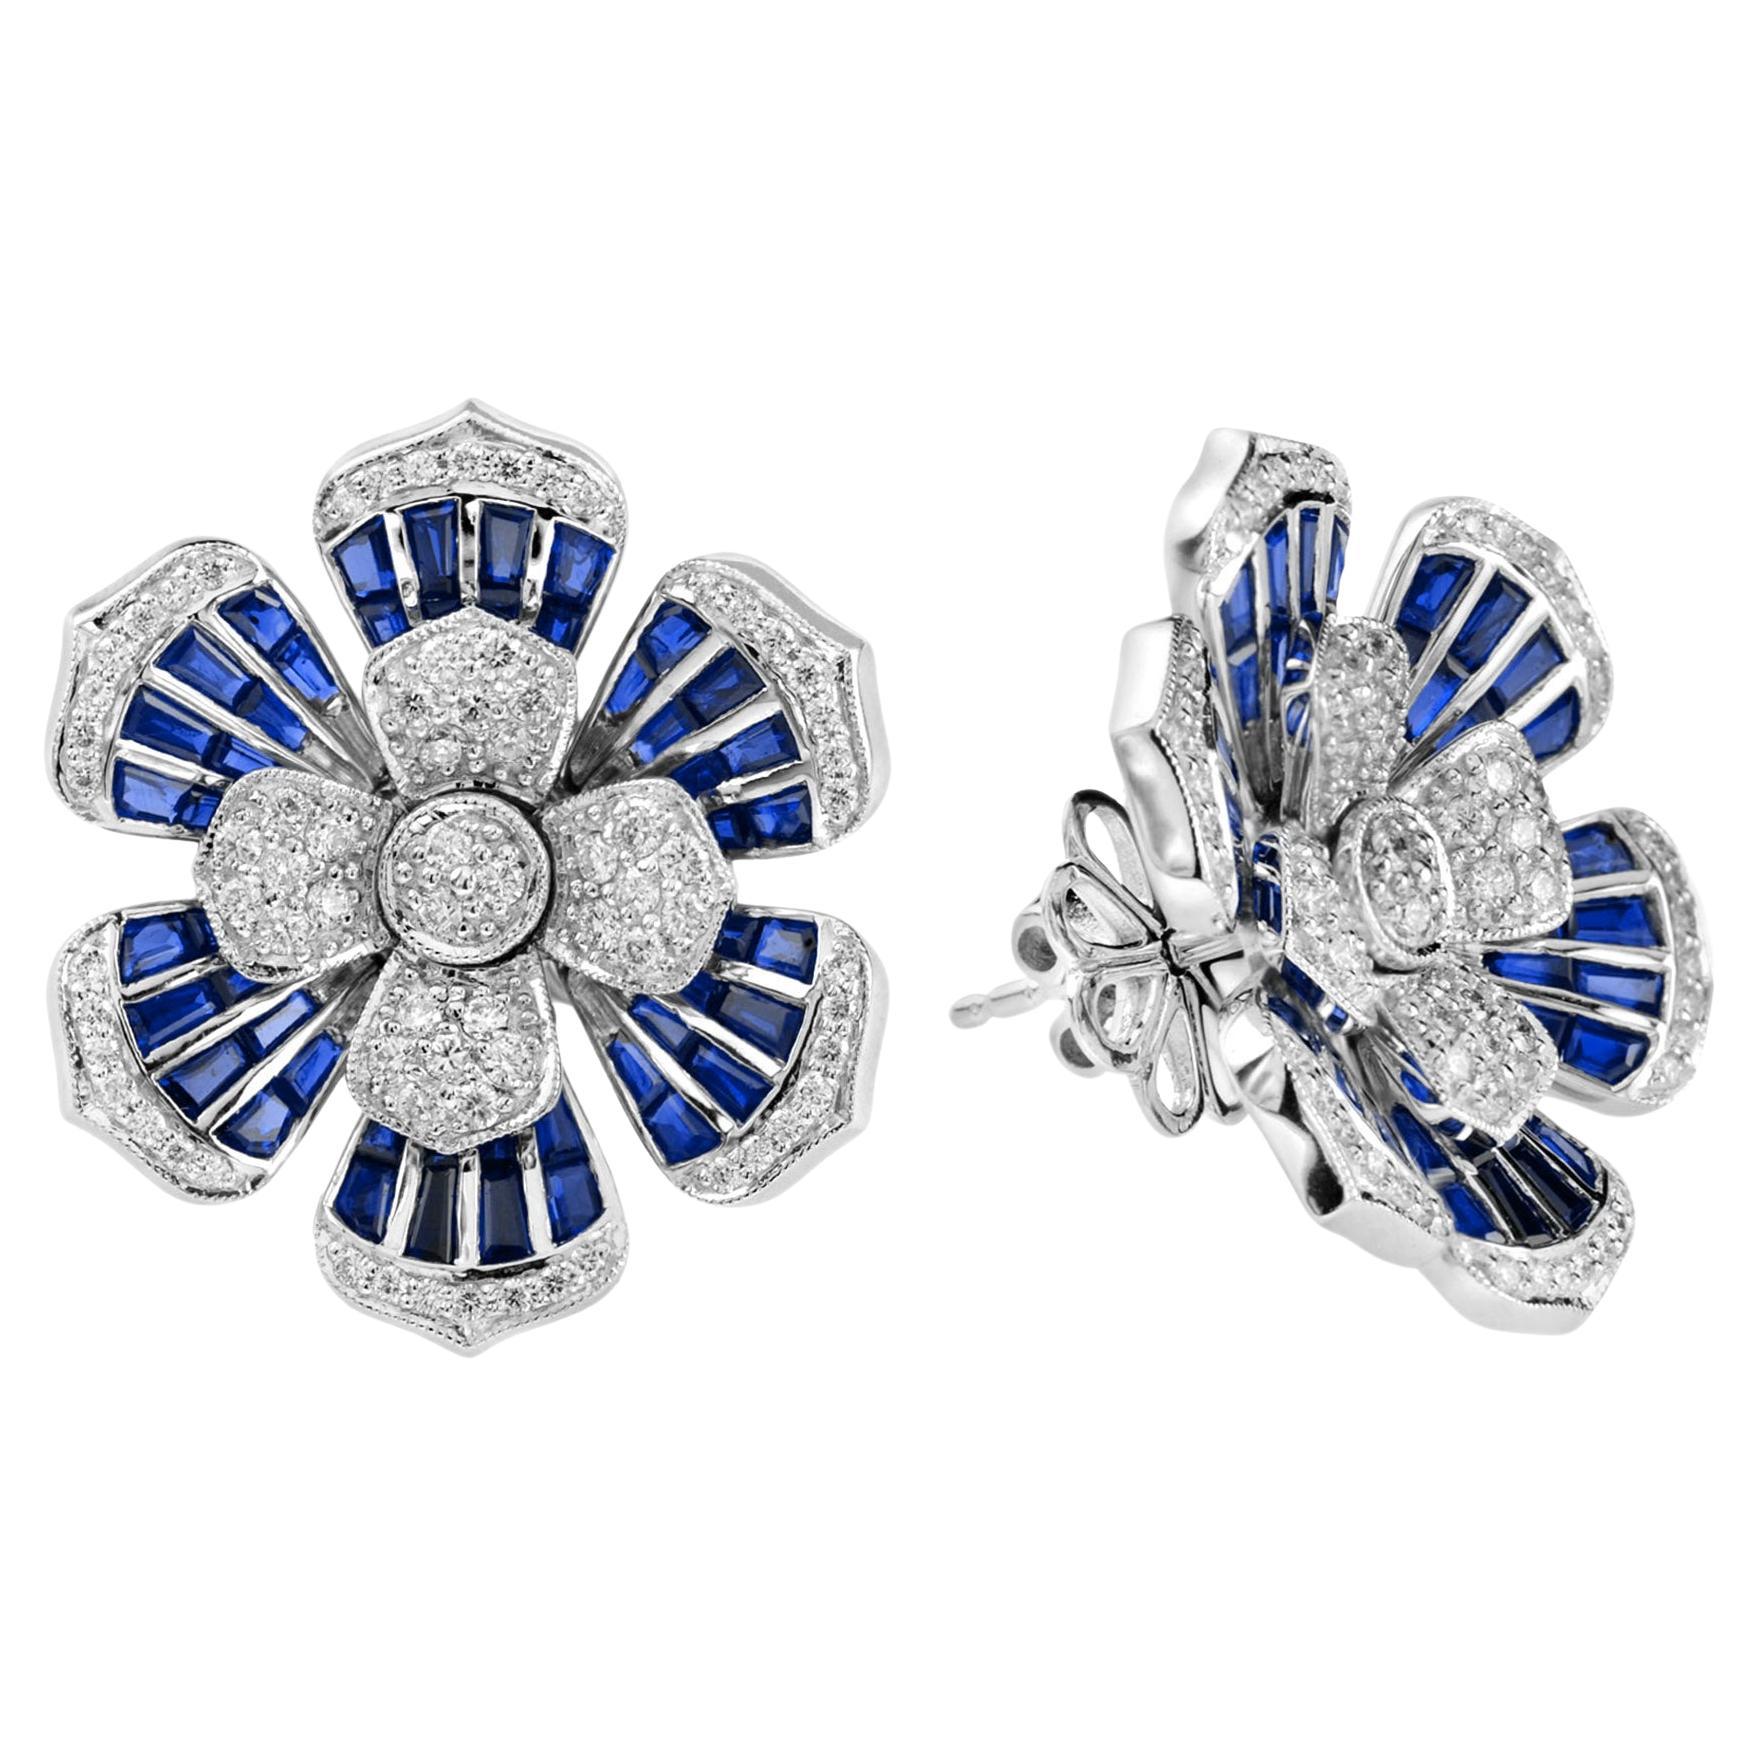 Elegant Diamond and Blue Sapphire Floral Stud Earrings in 18K White Gold For Sale